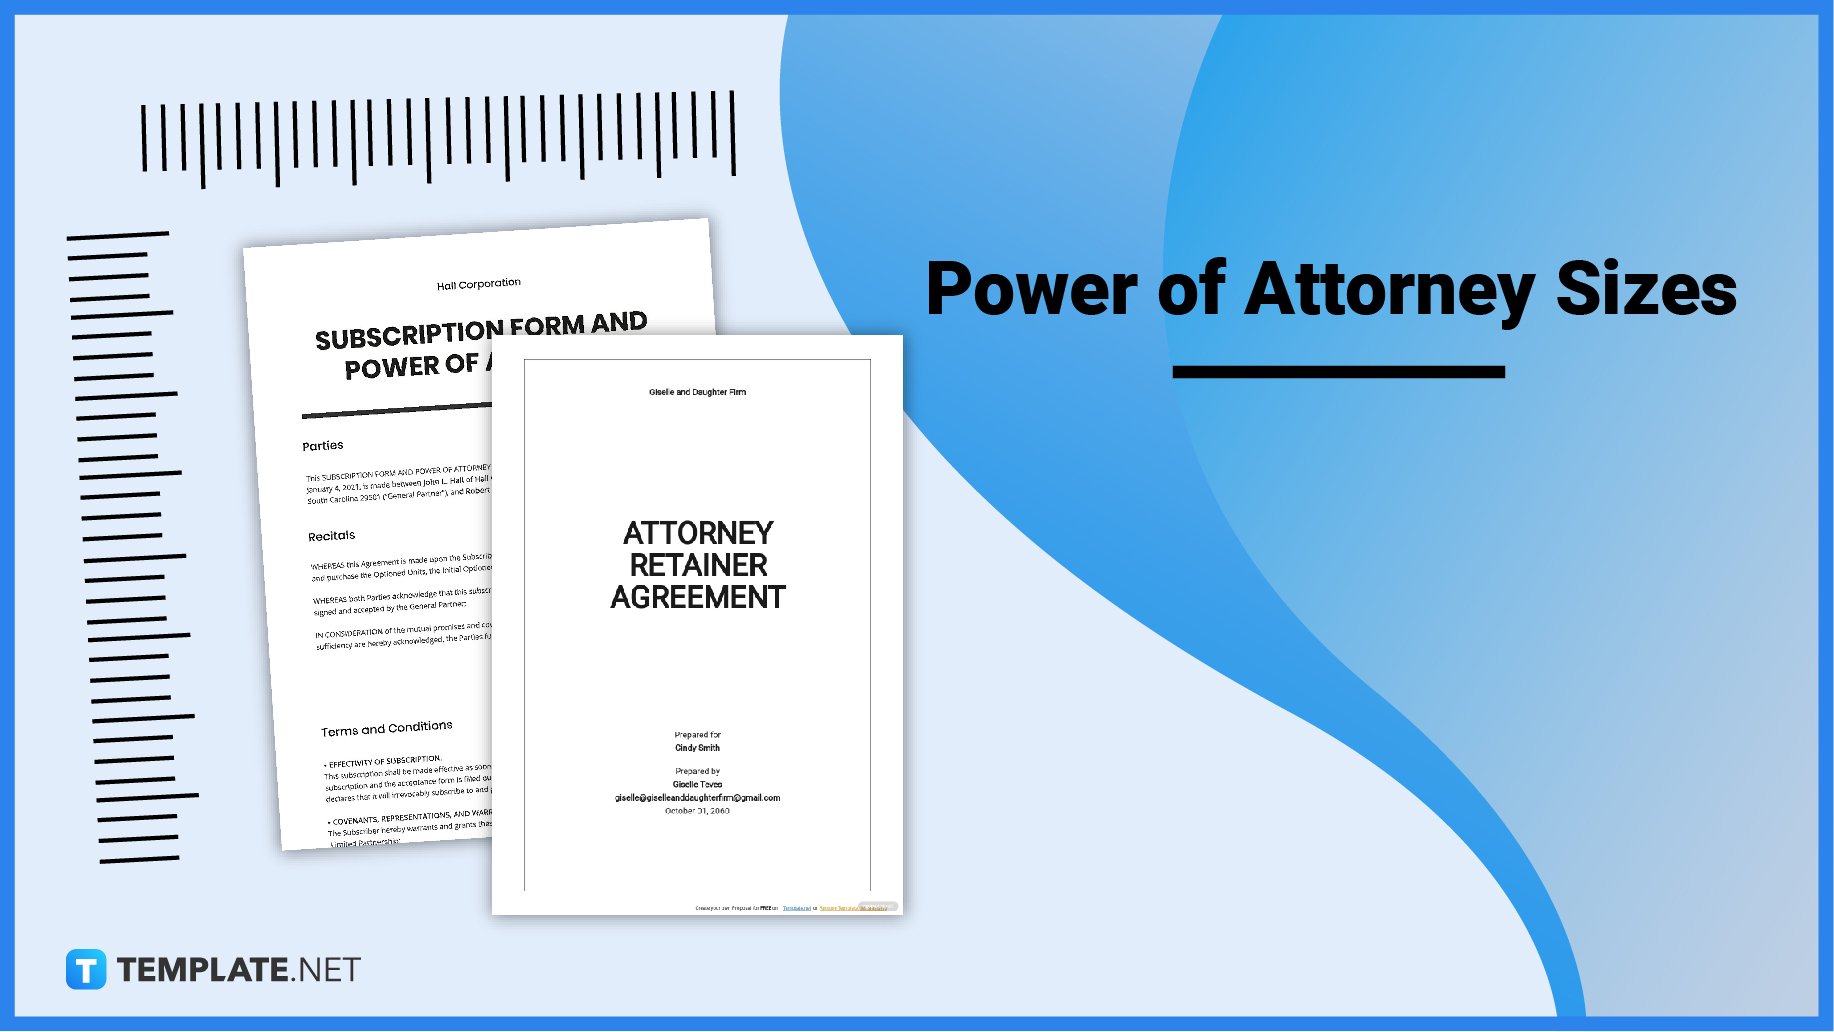 power-of-attorney-sizes1